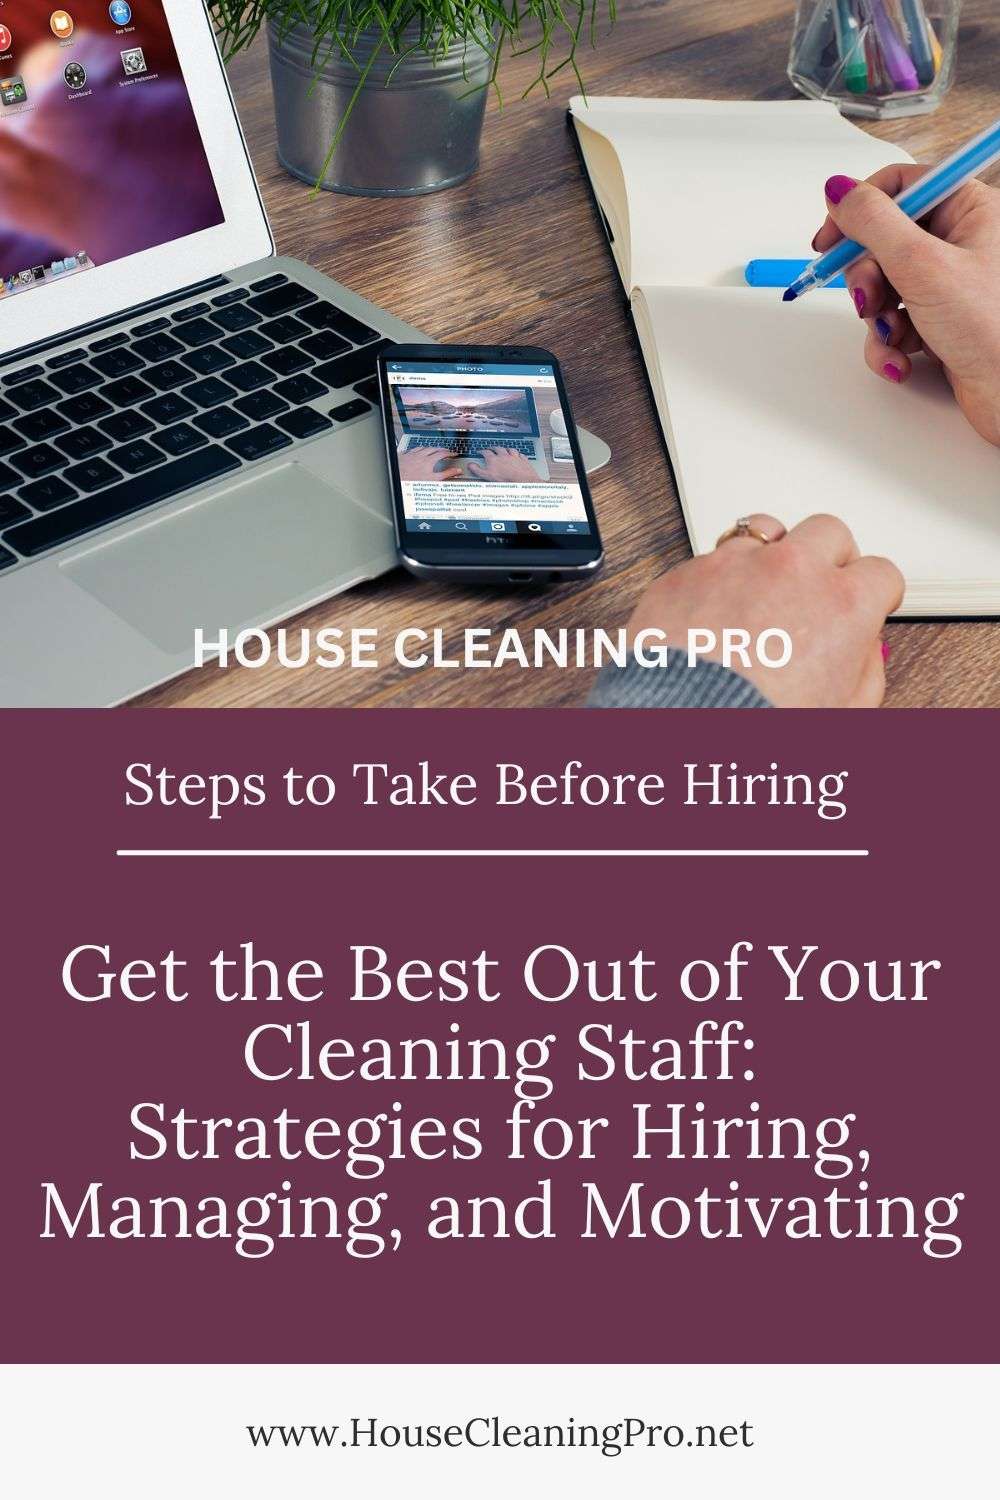 How to Manage Cleaning Staff